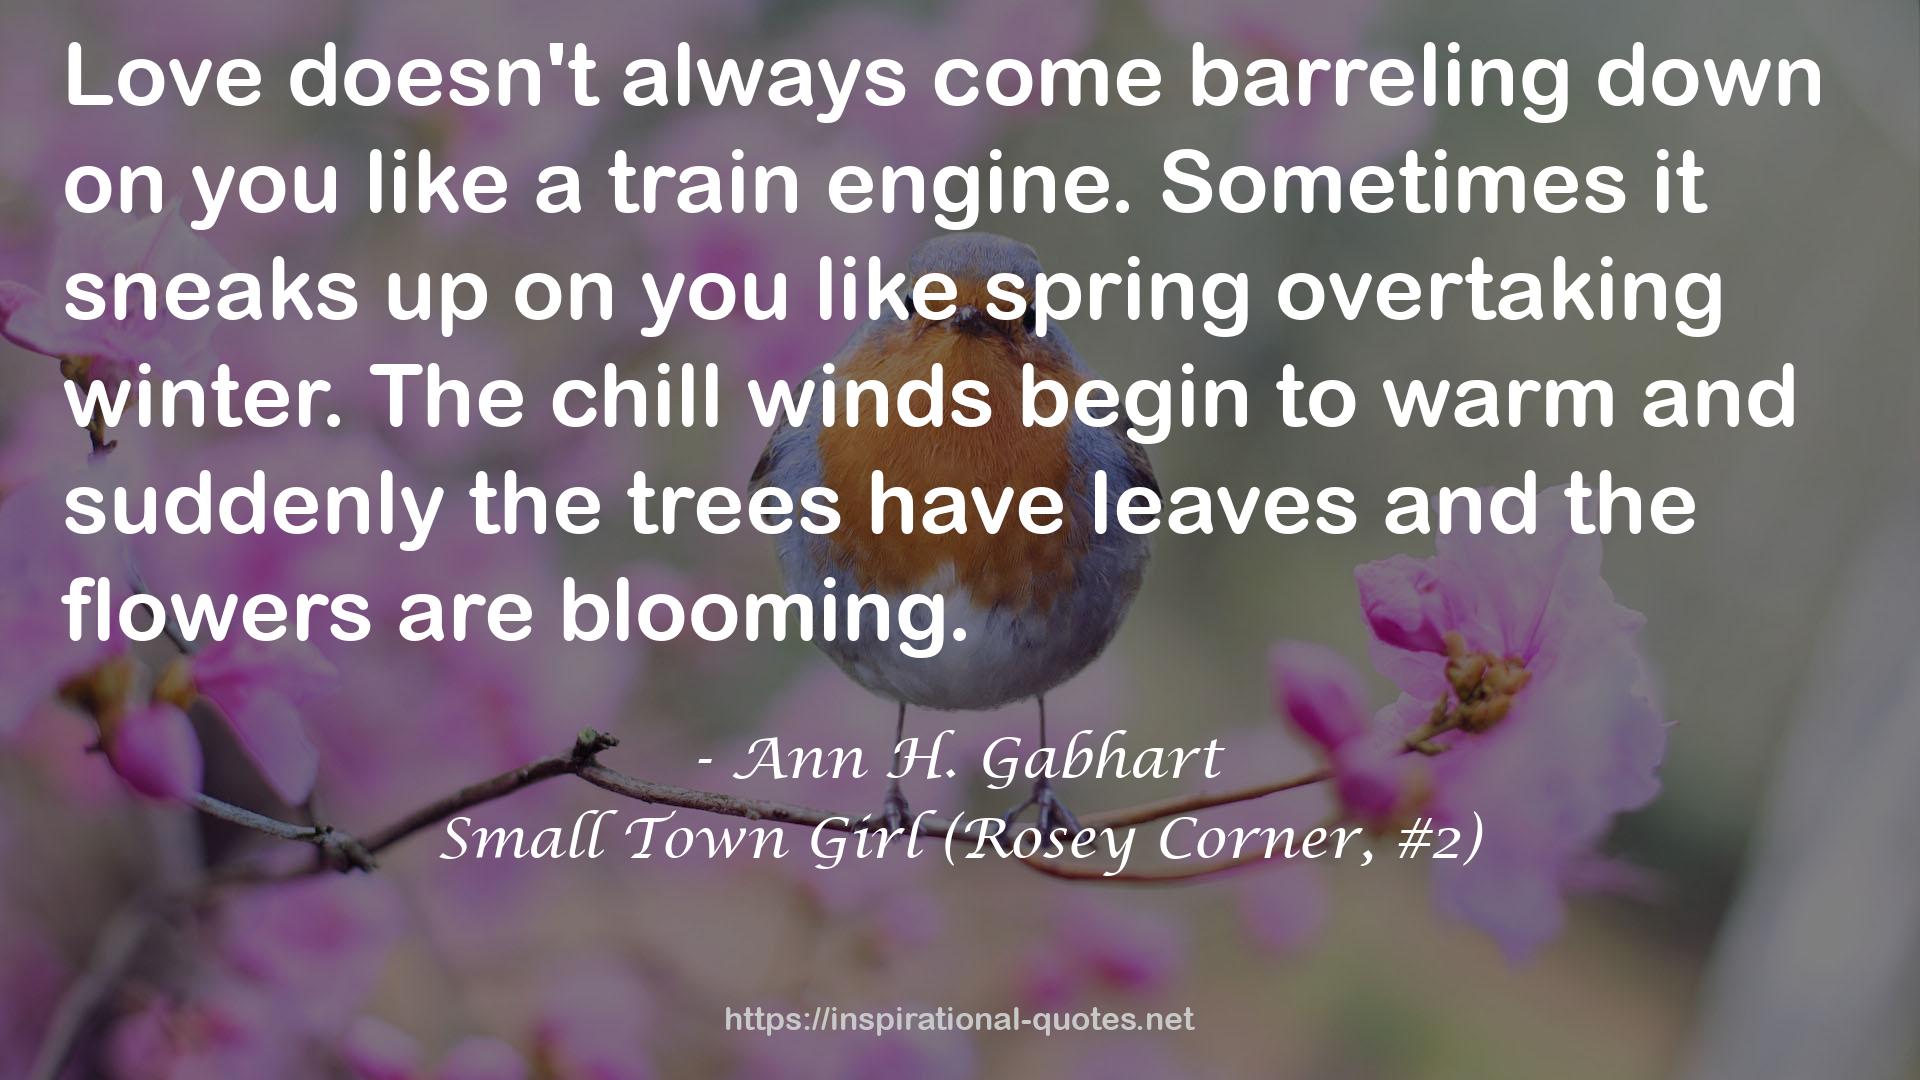 Small Town Girl (Rosey Corner, #2) QUOTES